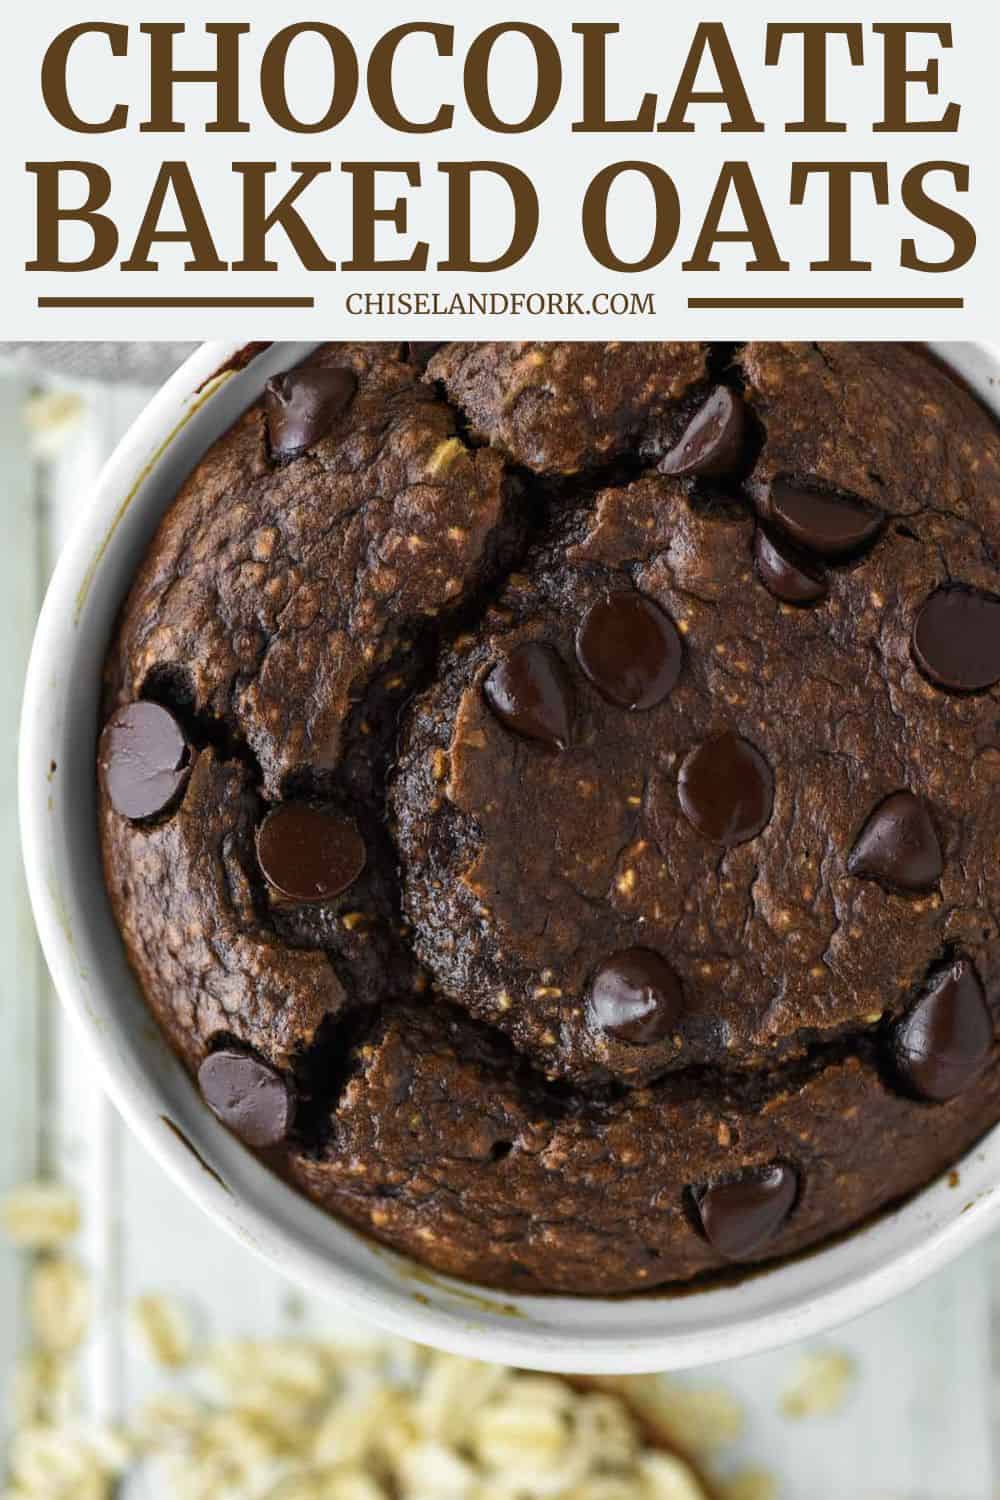 Chocolate Baked Oats - Chisel & Fork